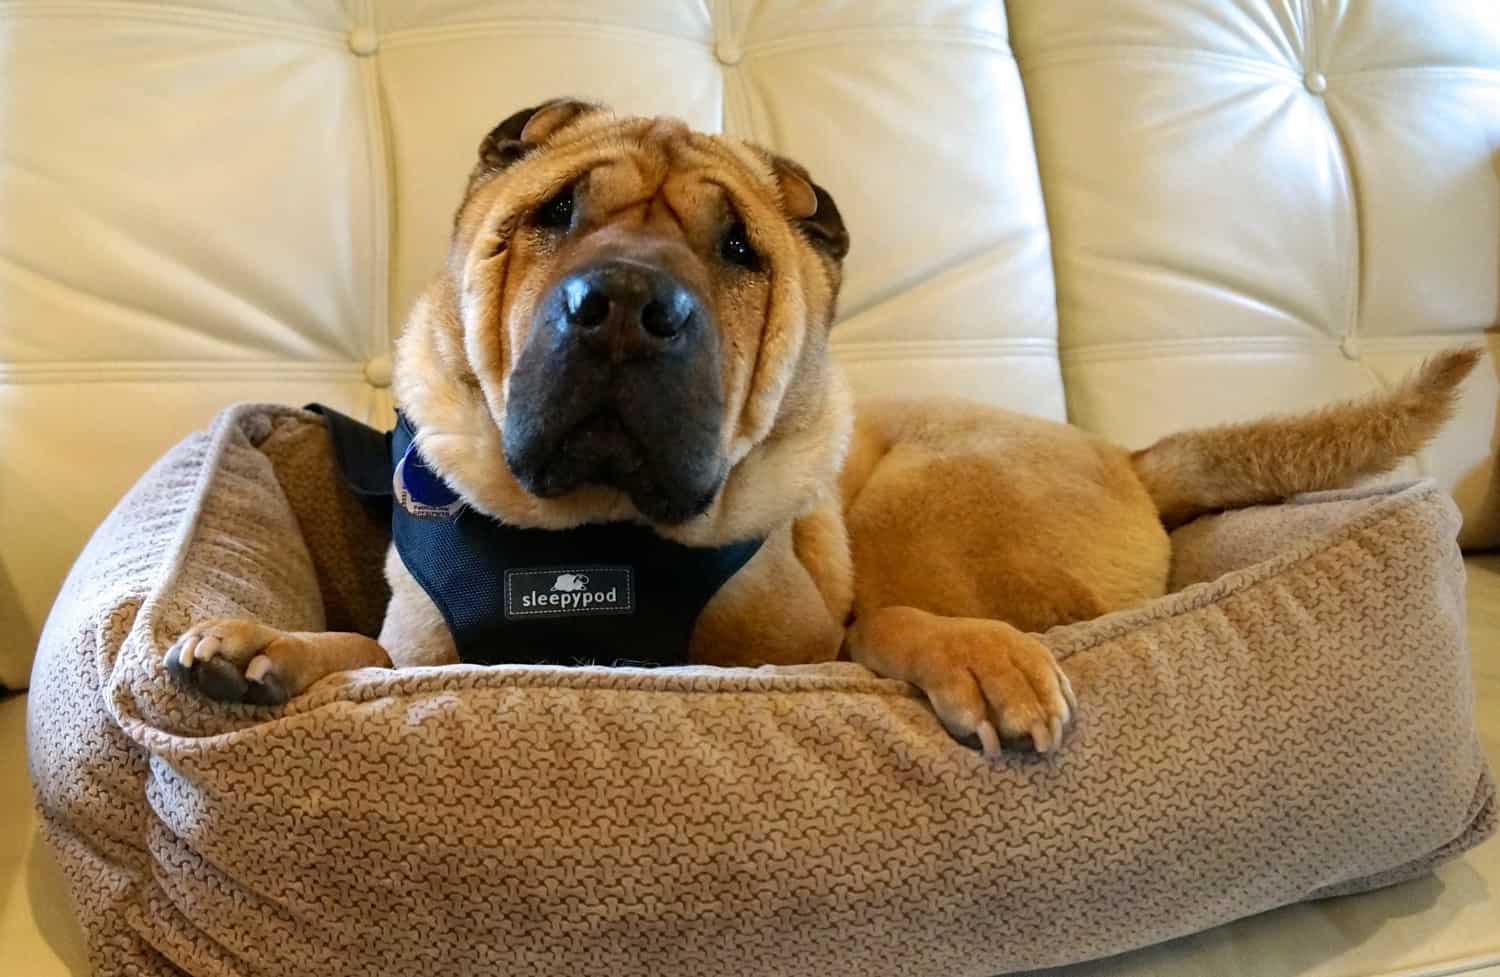 Ty the Shar-pei from GoPetFriendly.cm buckled into a seat belt using a Sleepypod pet safety harness